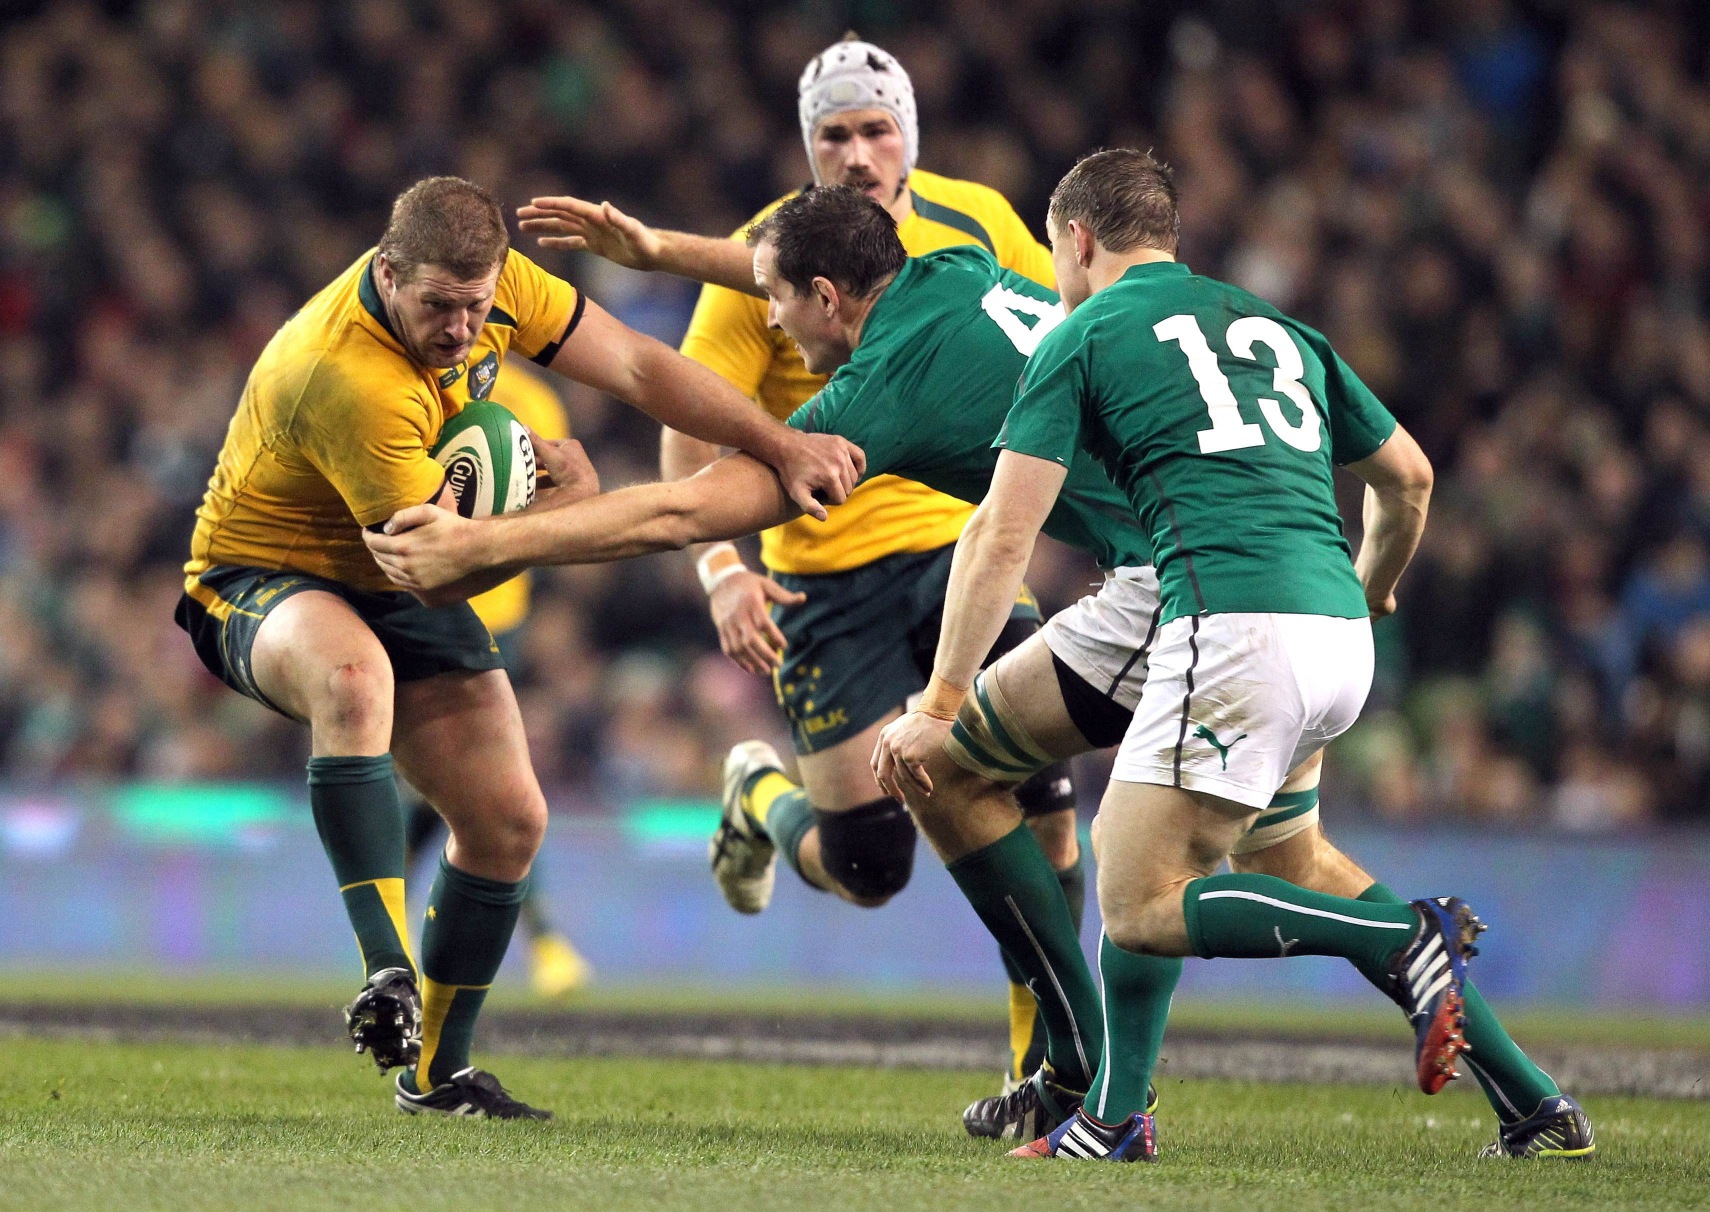 Australia's prop James Slipper is tackled by Ireland's lock Devin Toner and centre Brian O’Driscoll during the match between Ireland and Australia at Aviva Stadium in Dublin. Photo: AFP